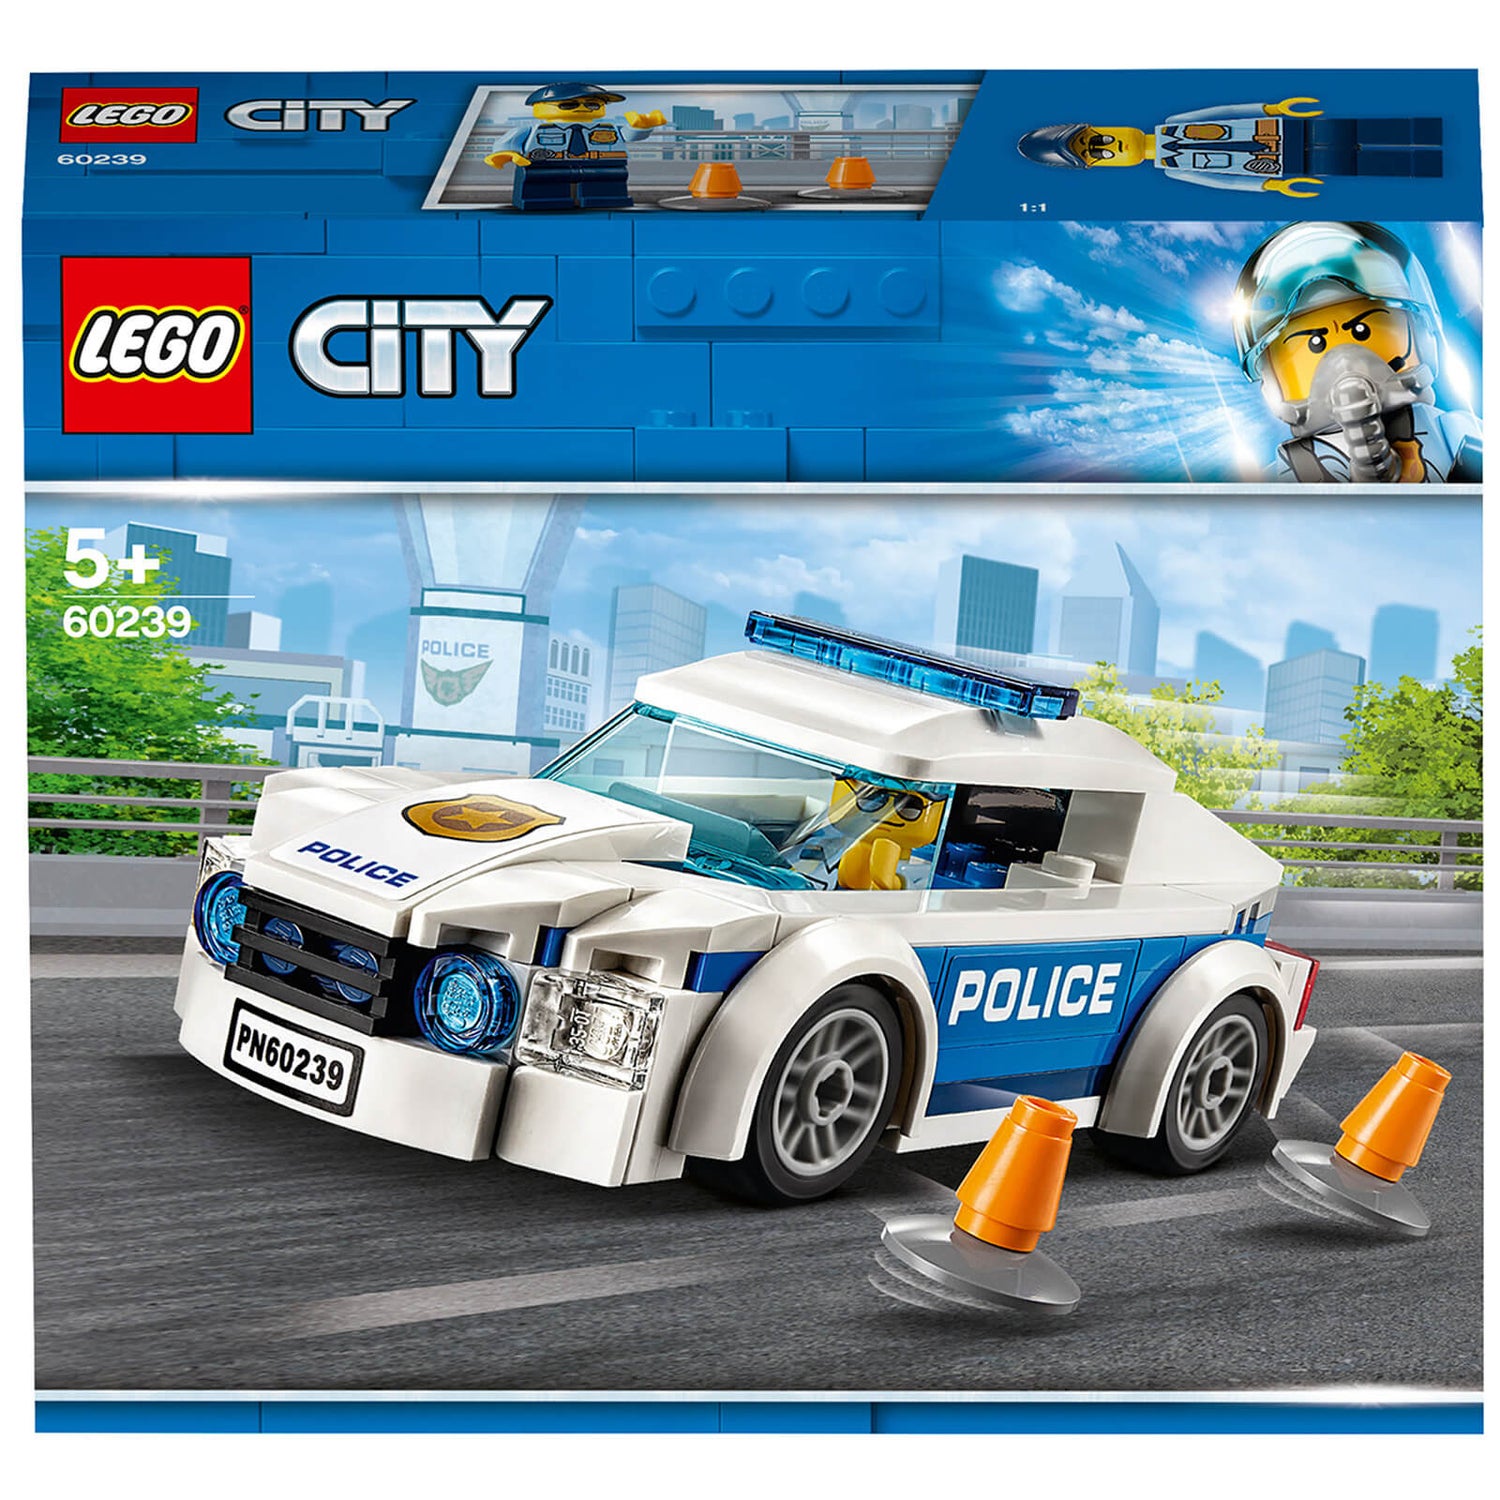 LEGO City: Police Patrol Chase Car Toy with Policeman (60239)